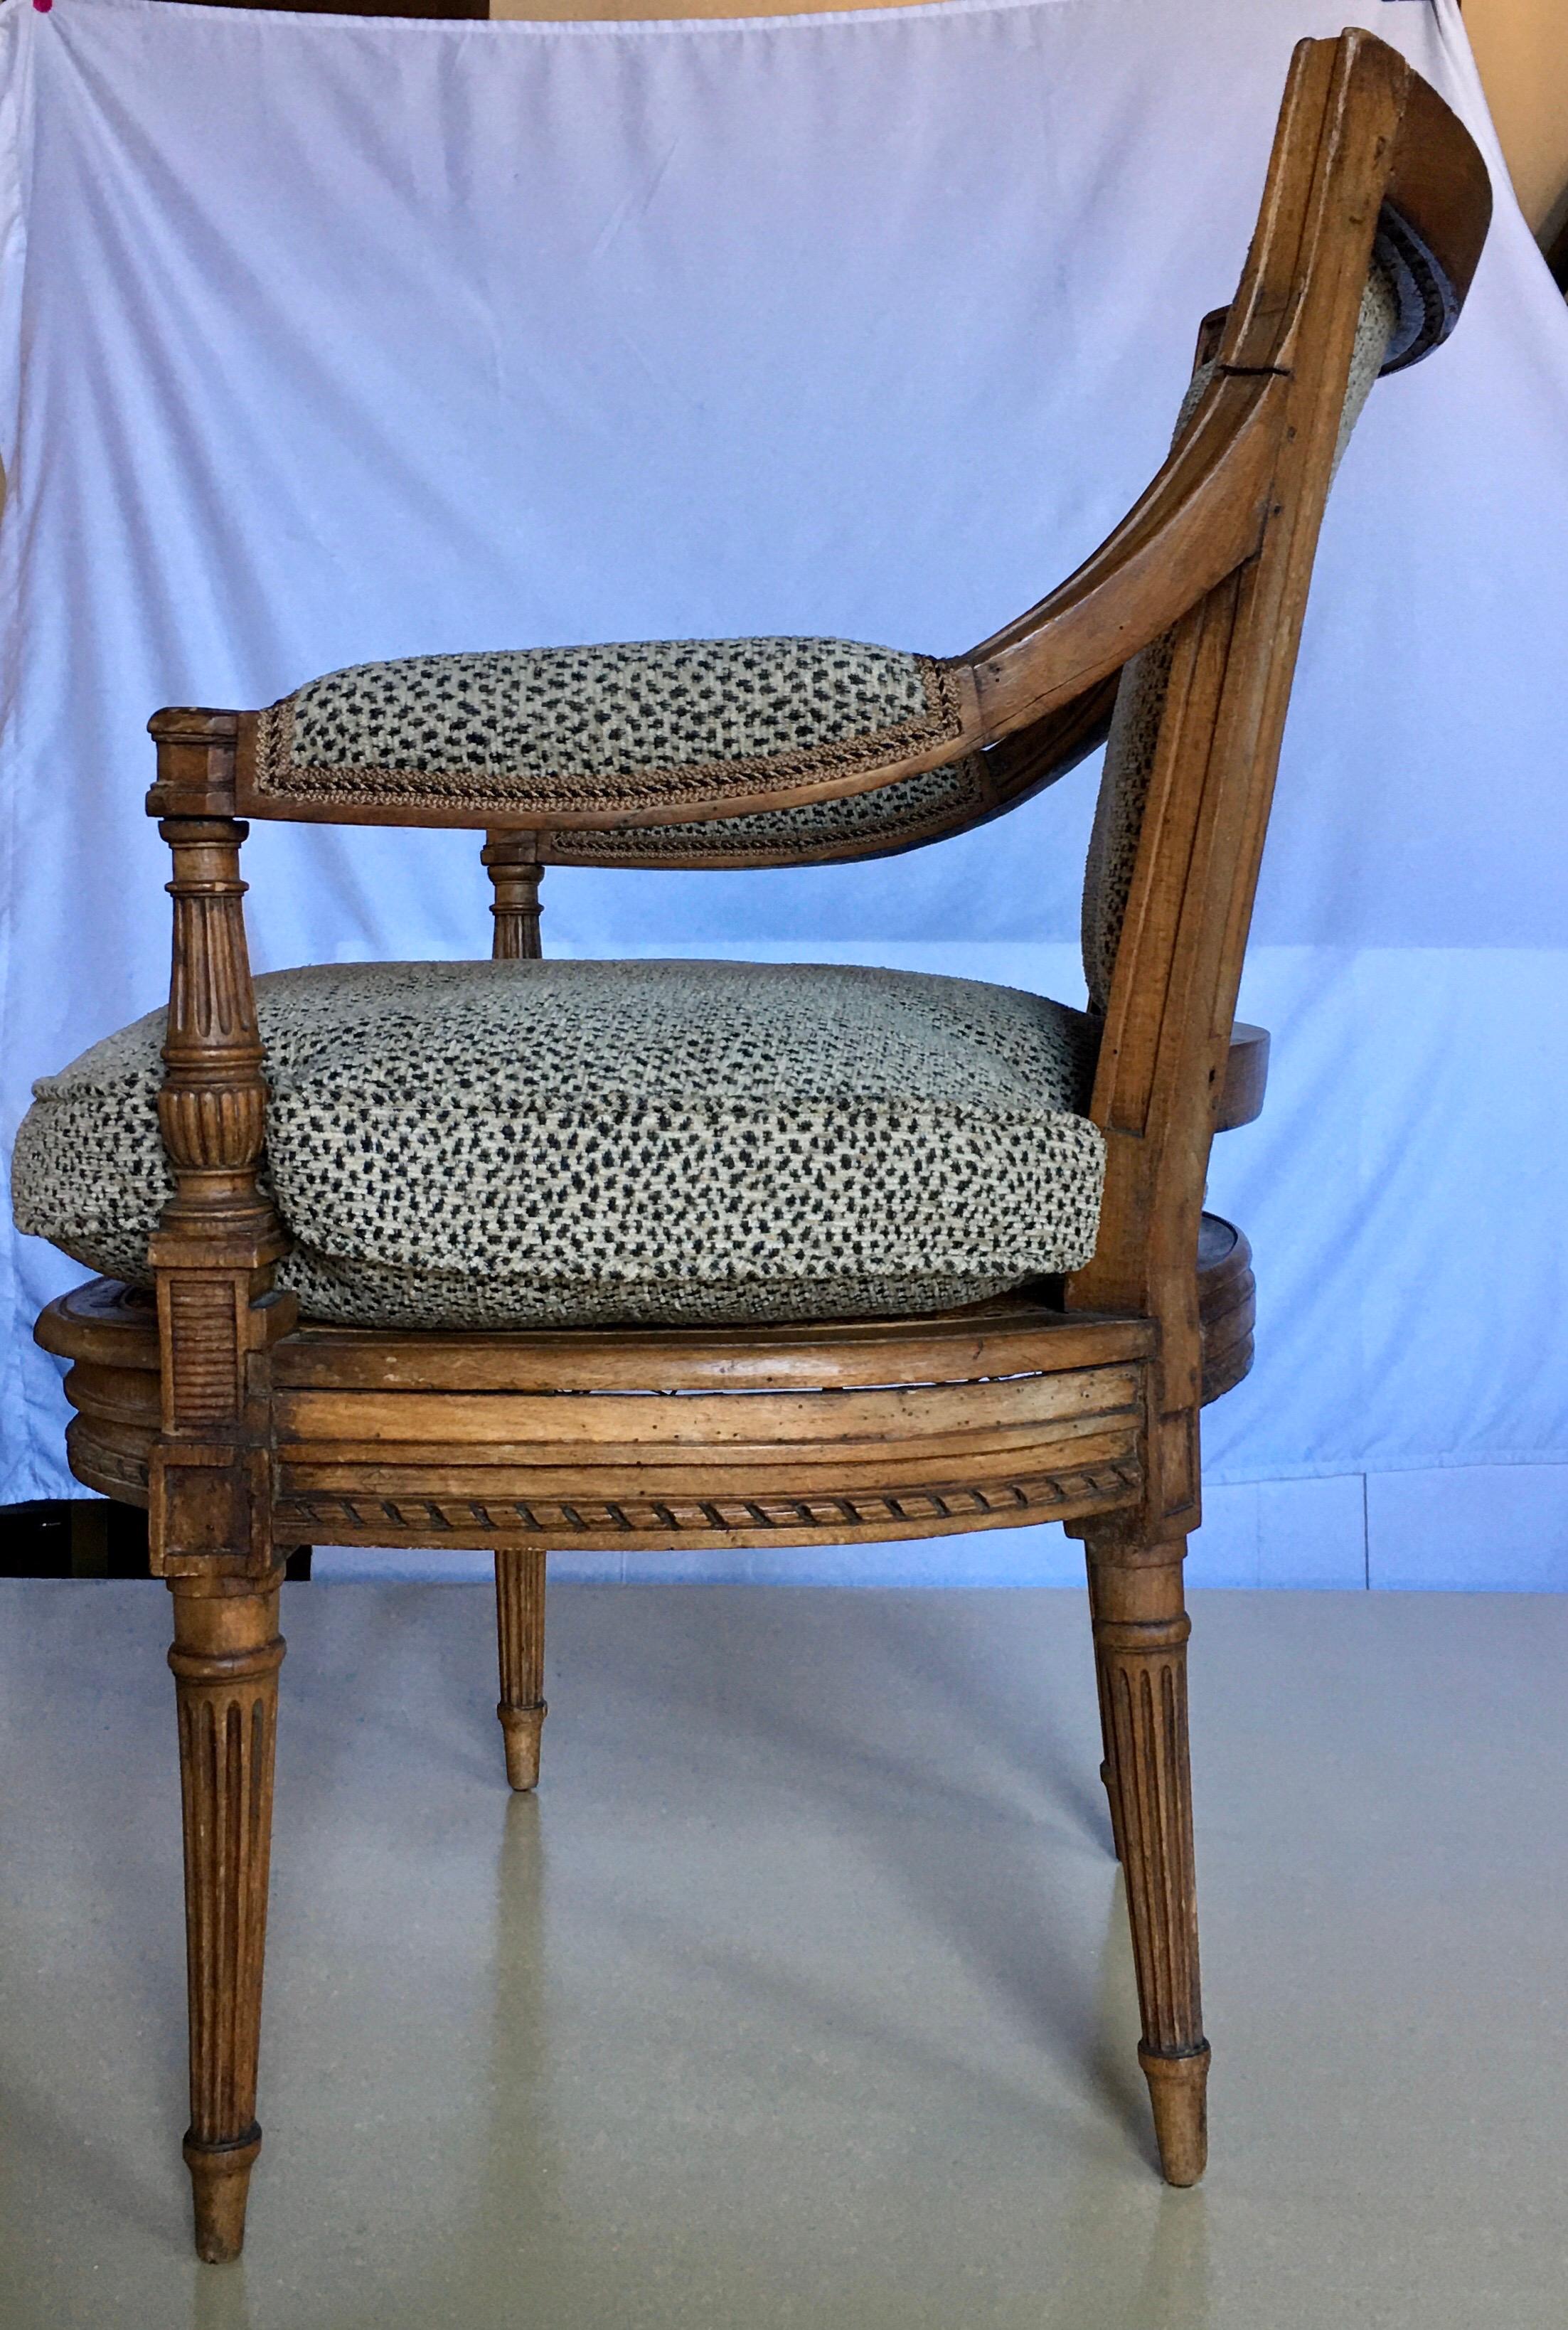 French Louis XV style cane seat accent armchair with upholstered arm and back and loose feather down stuffed seat cushion. Newly reupholstered in an animal print fabric by Kravet. This beautifully carved wood Fauteuil chair was restored in 1955 by a